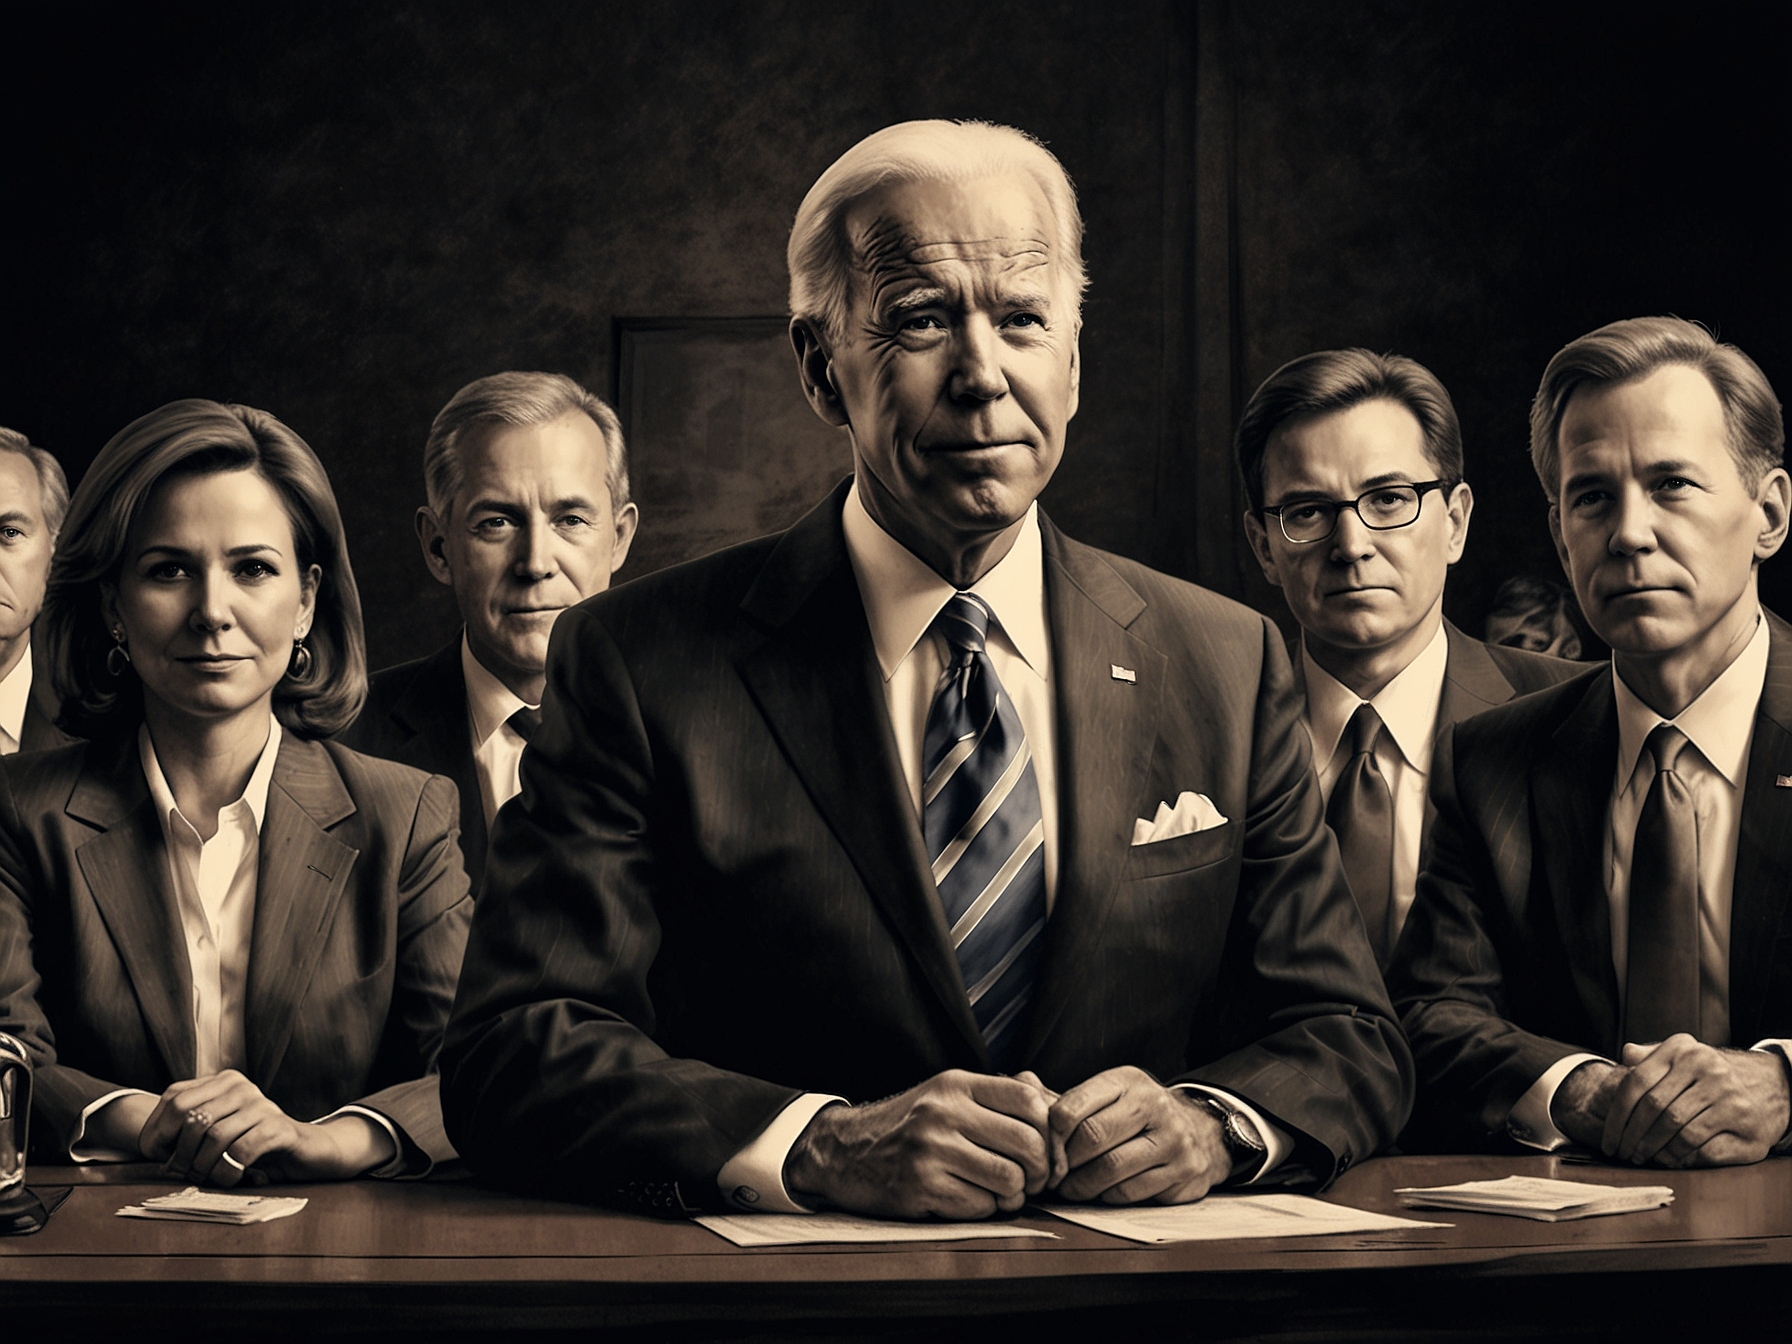 Joe Biden sits with a group of 16 advisers, intensely preparing and discussing strategies for the CNN debate, aiming to cover various topics including economic policies and foreign affairs.